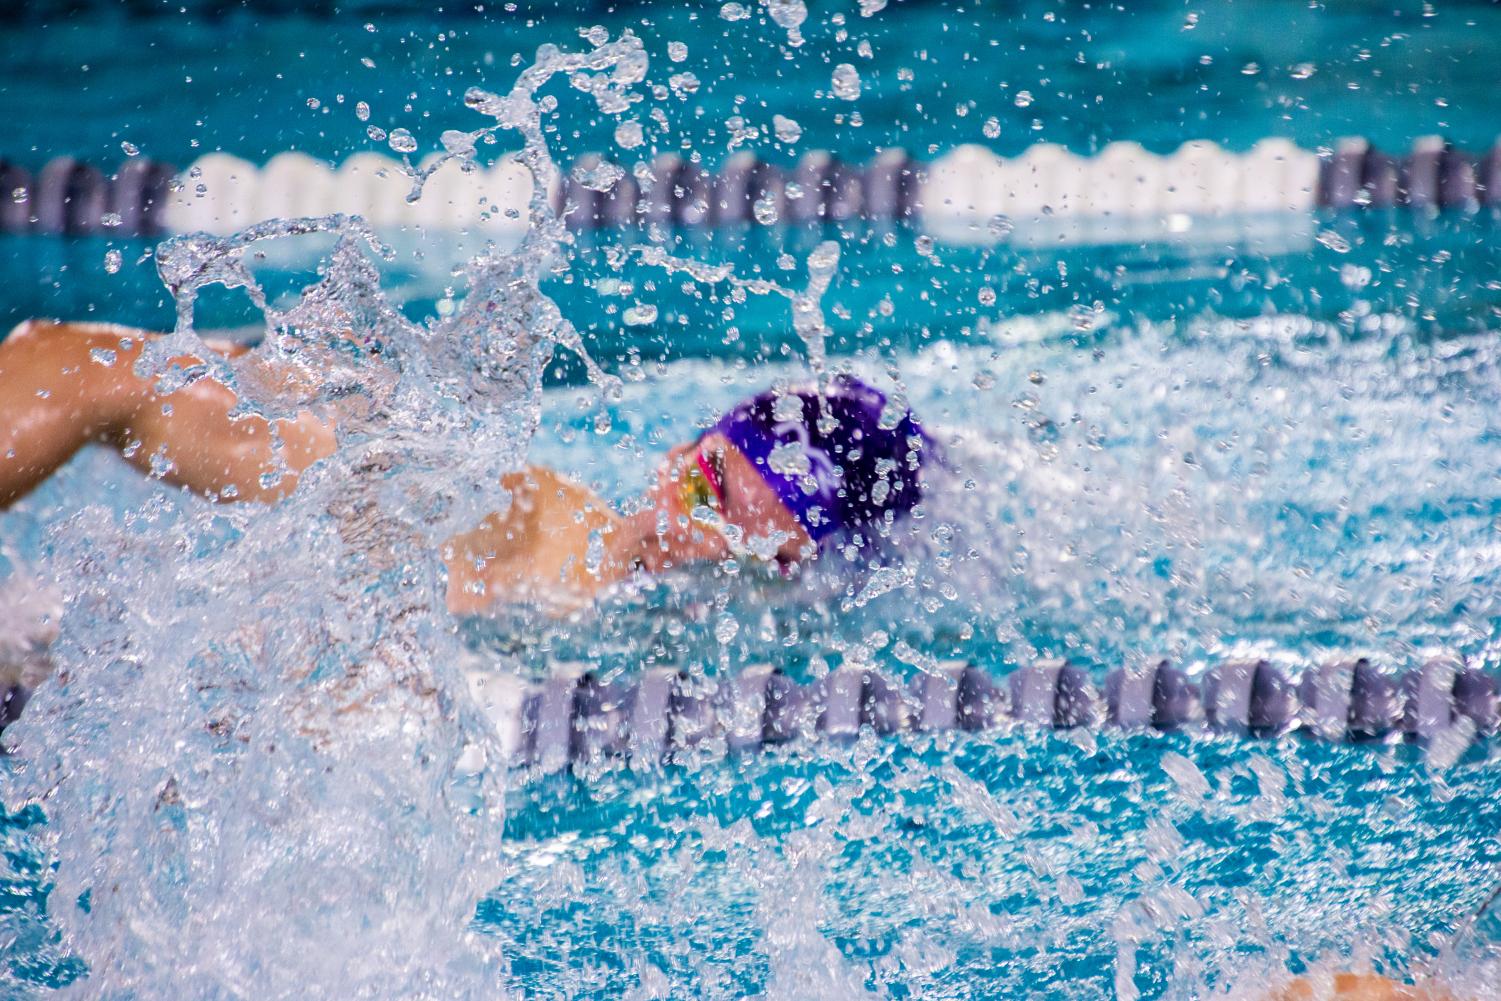 The foreground shows large splashes of water as a person with a purple cap swims in the back.